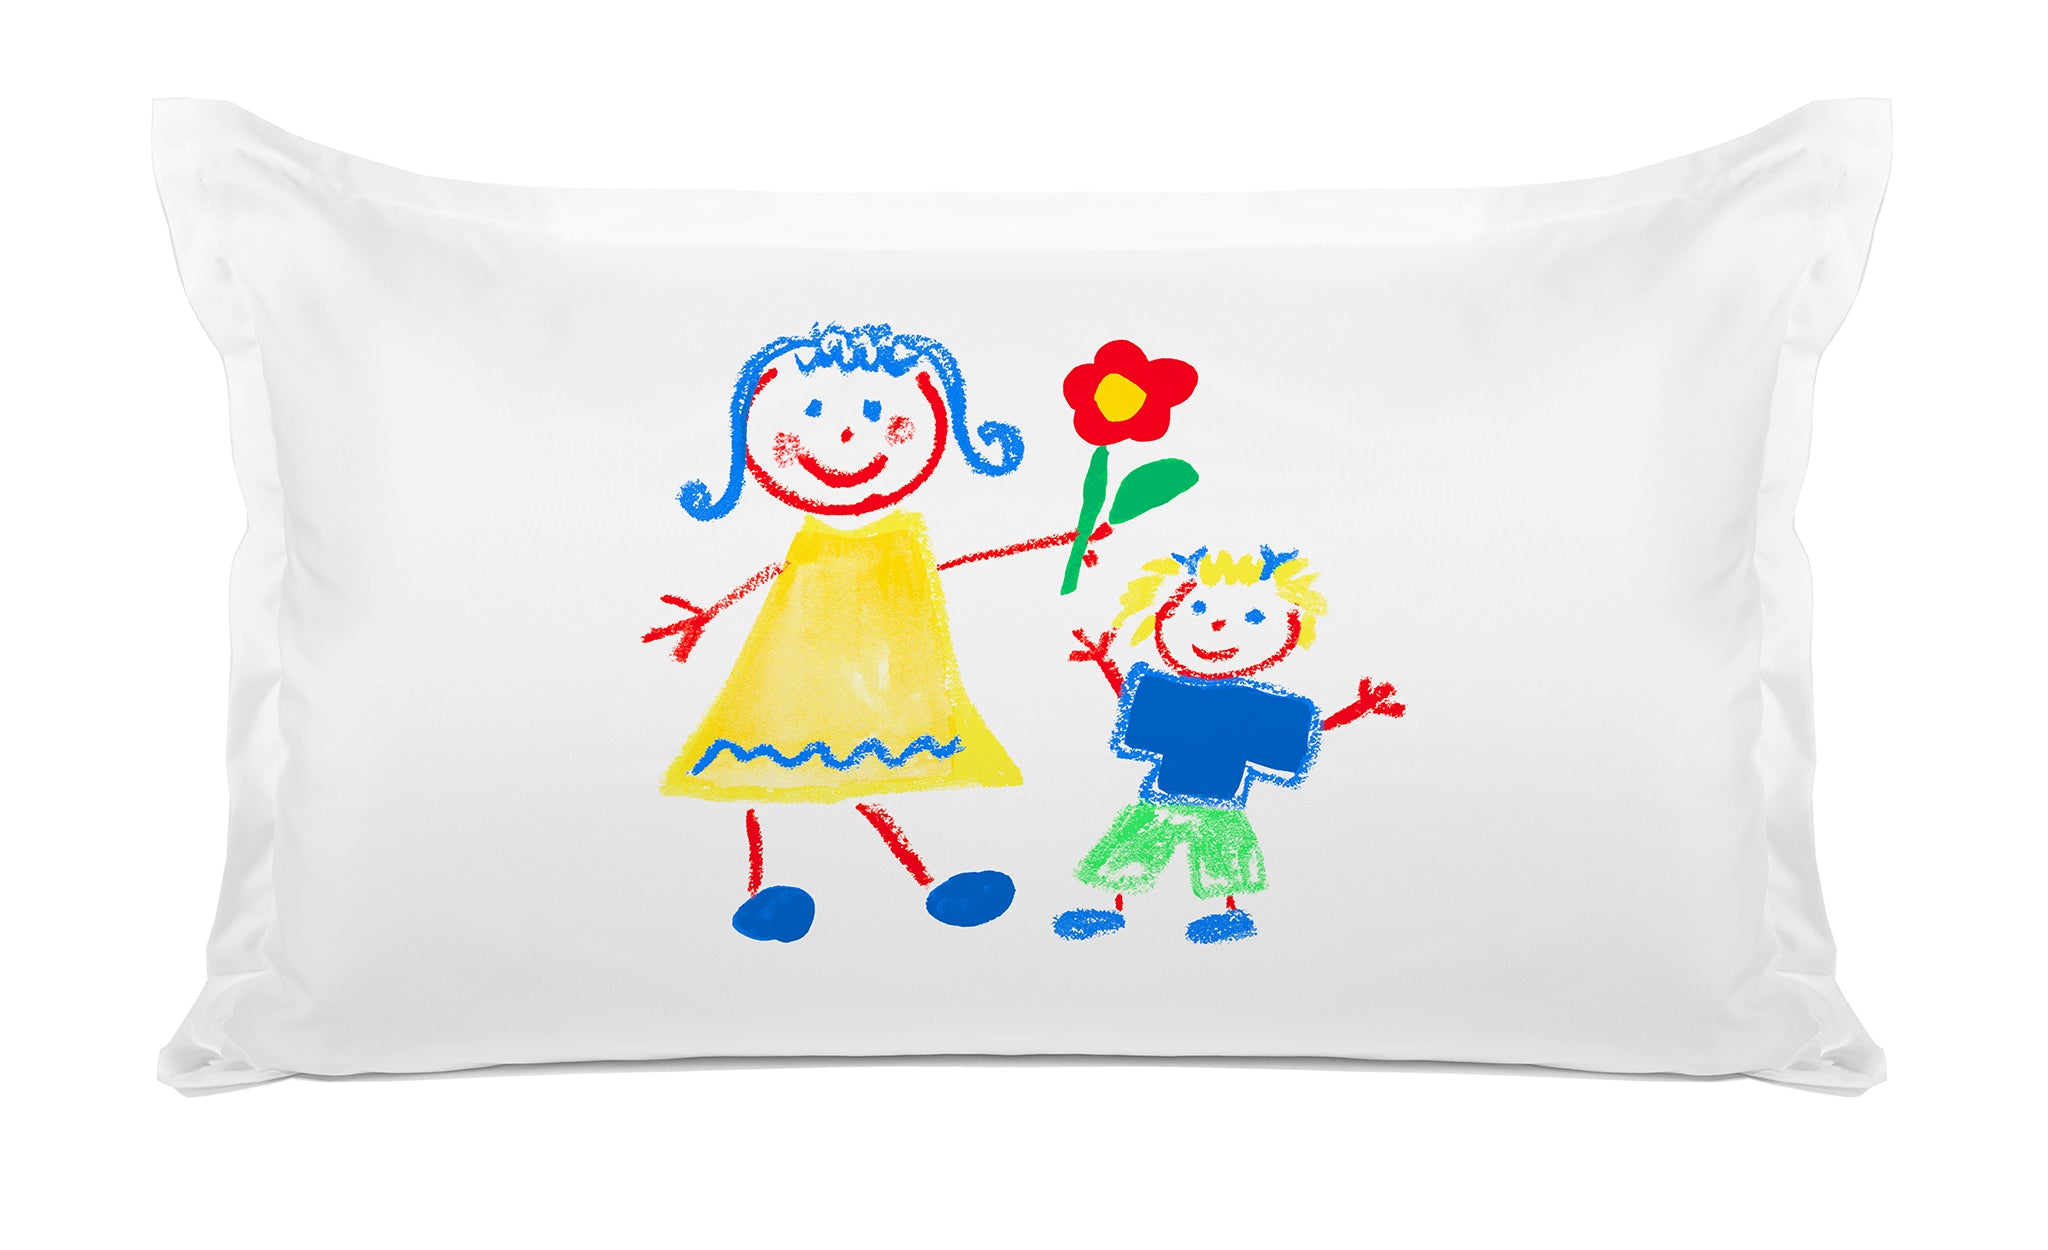 Girls Playing - Personalized Kids Pillowcase Collection